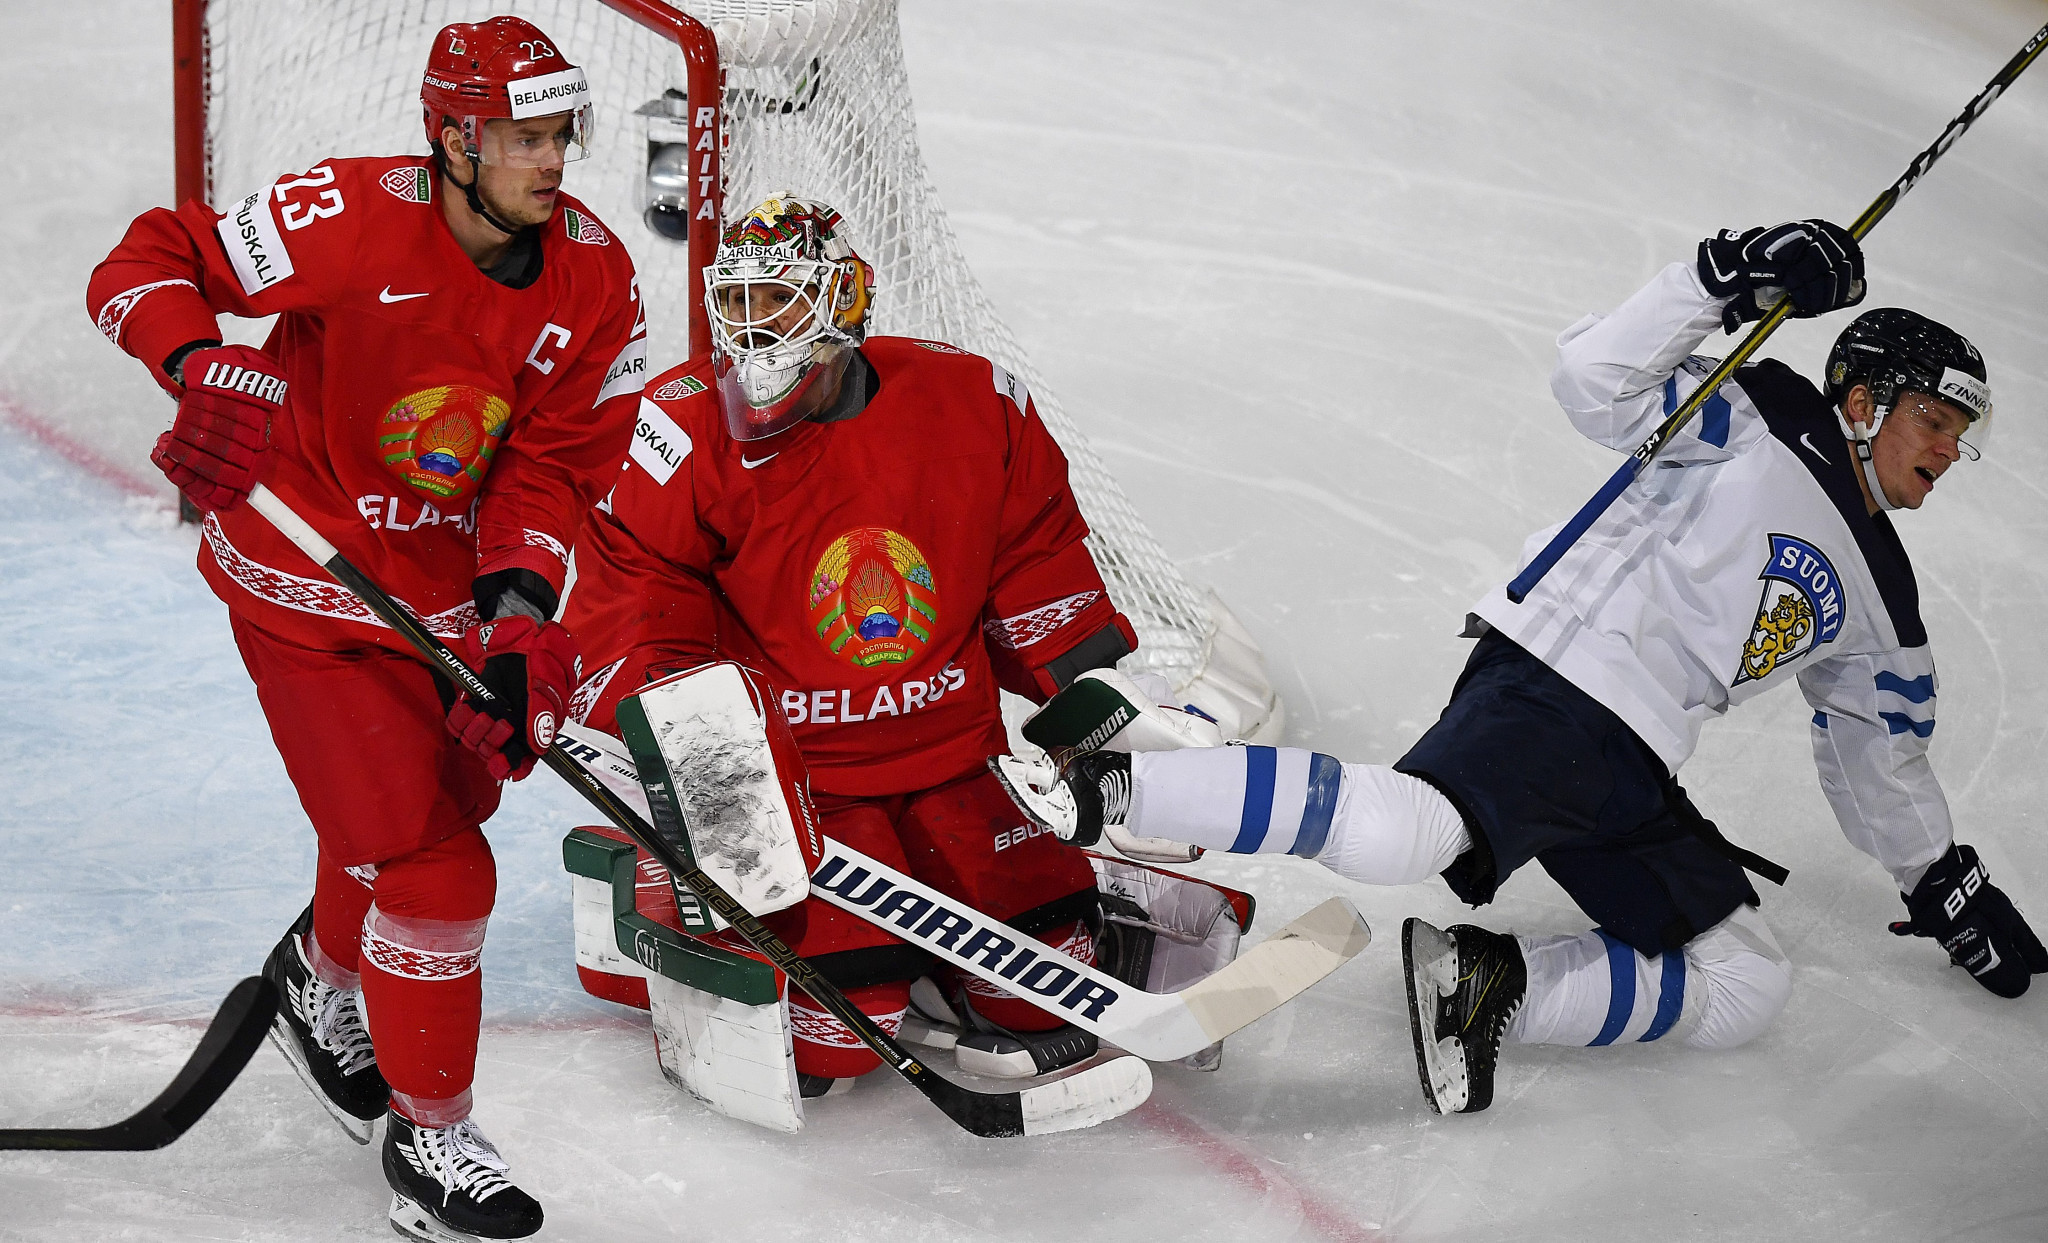 The tournament will be co-hosted by Belarus and Latvia ©Getty Images